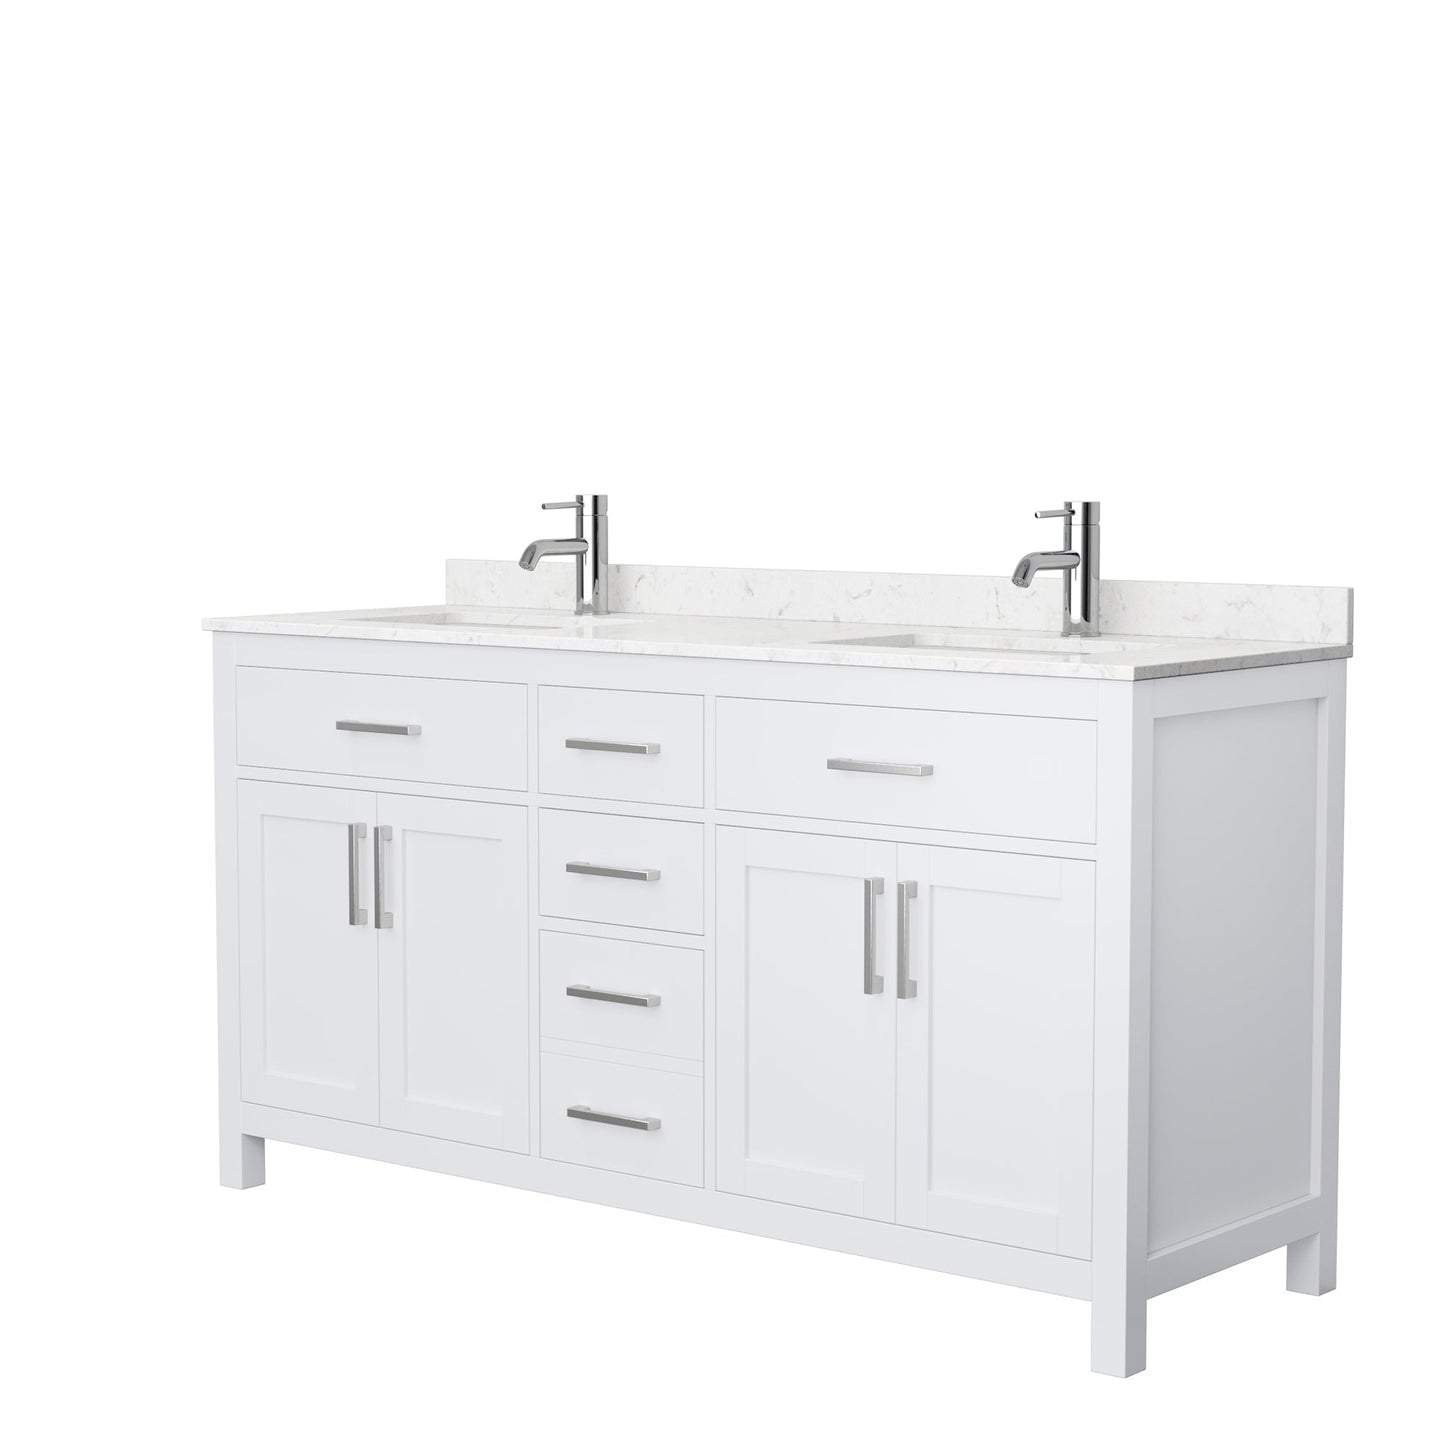 Wyndham Collection Beckett 66" Double Bathroom White Vanity With White Carrara Cultured Marble Countertop, Undermount Square Sink And Brushed Nickel Trim